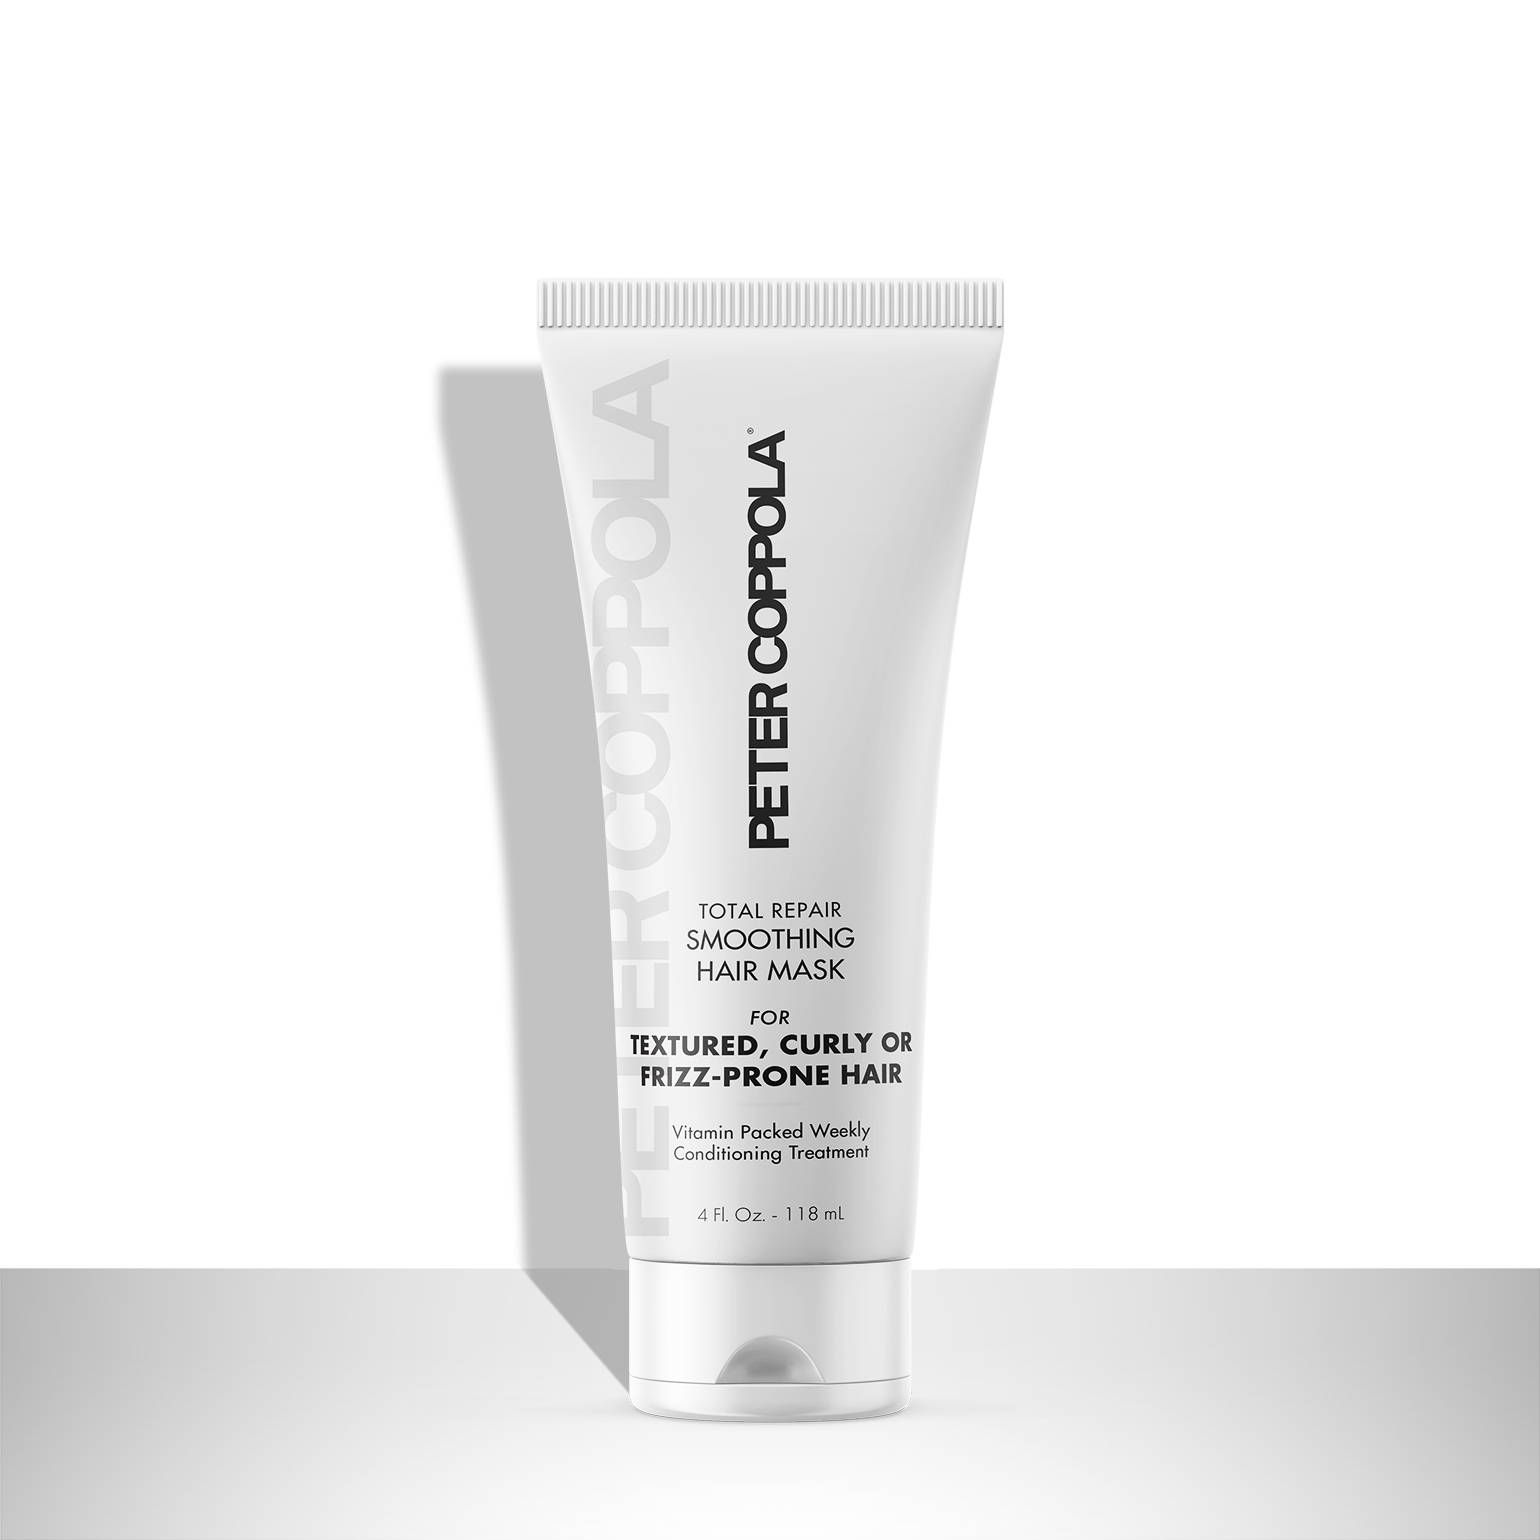 4 ounce tube of total repair smoothing hair mask